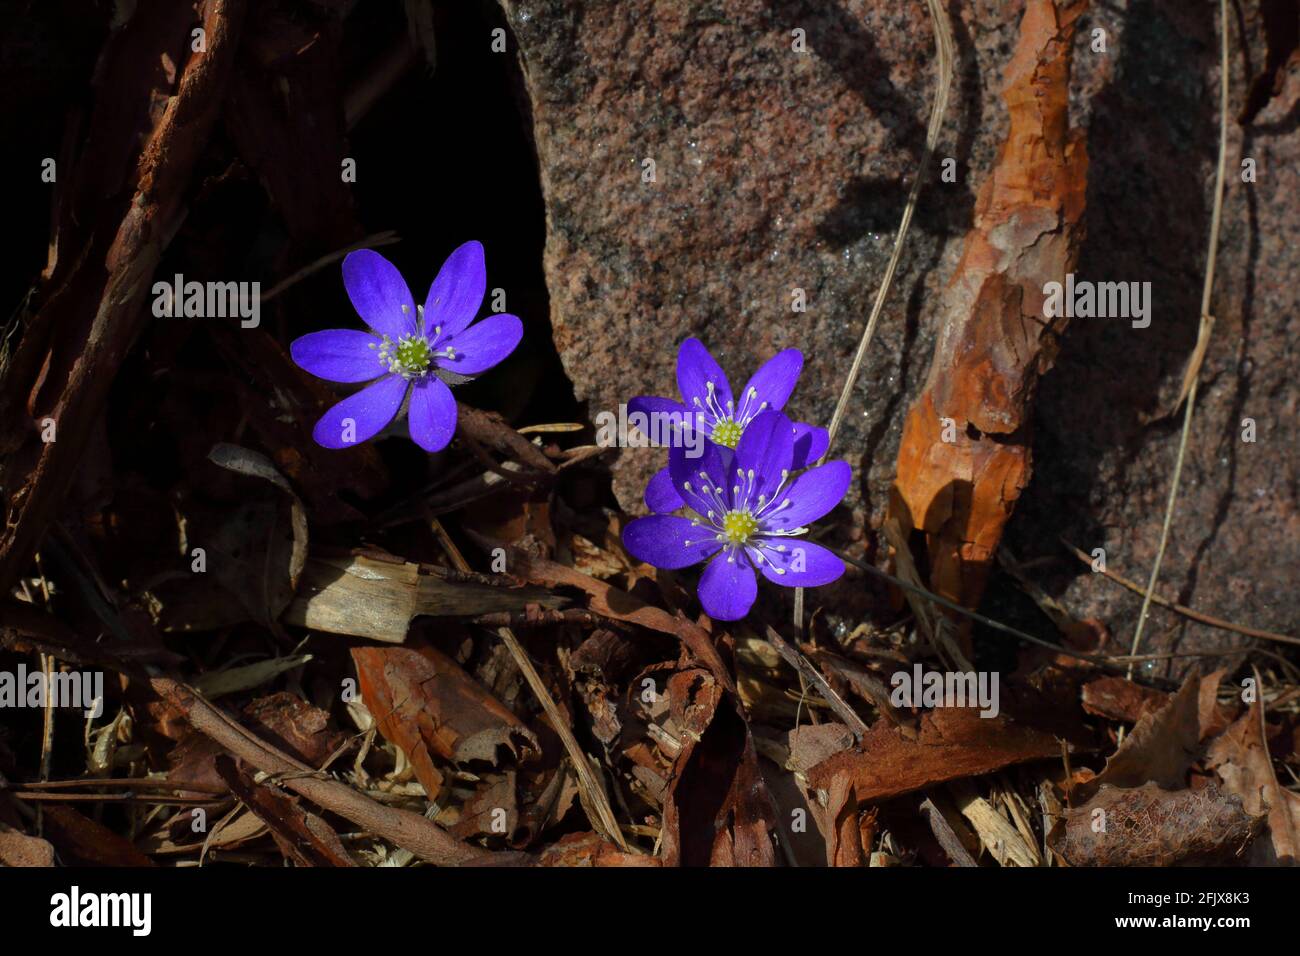 Close up shot of a group of early blue spring flowers hebatica nobilis besides a rock in sunlight among dead grass, leaves and pieces of pine bark. Stock Photo